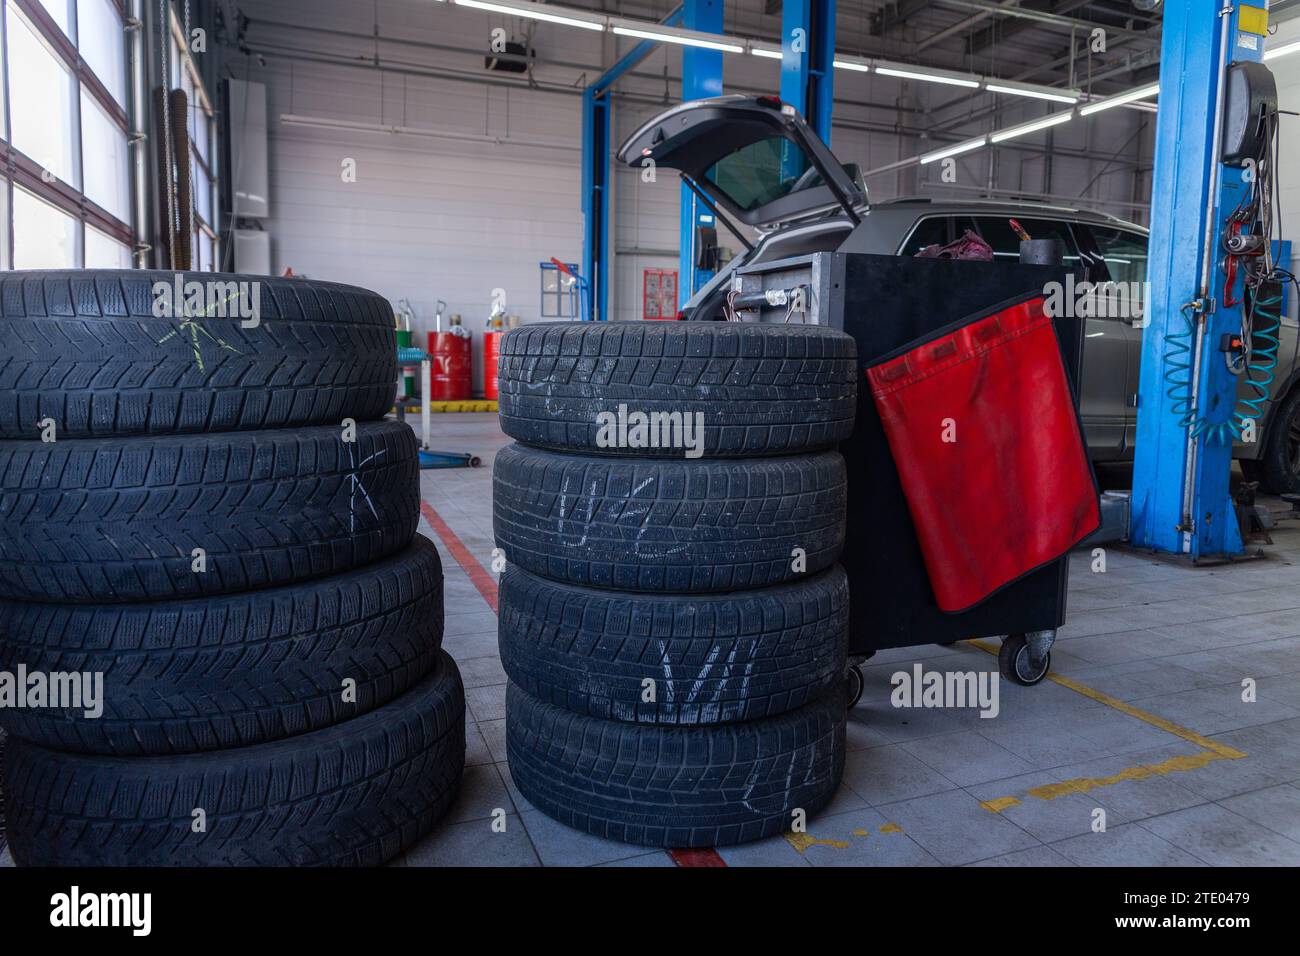 A set of tires for seasonal replacement near the lift in the tire workshop. The concept of seasonal car tire replacement. Stock Photo